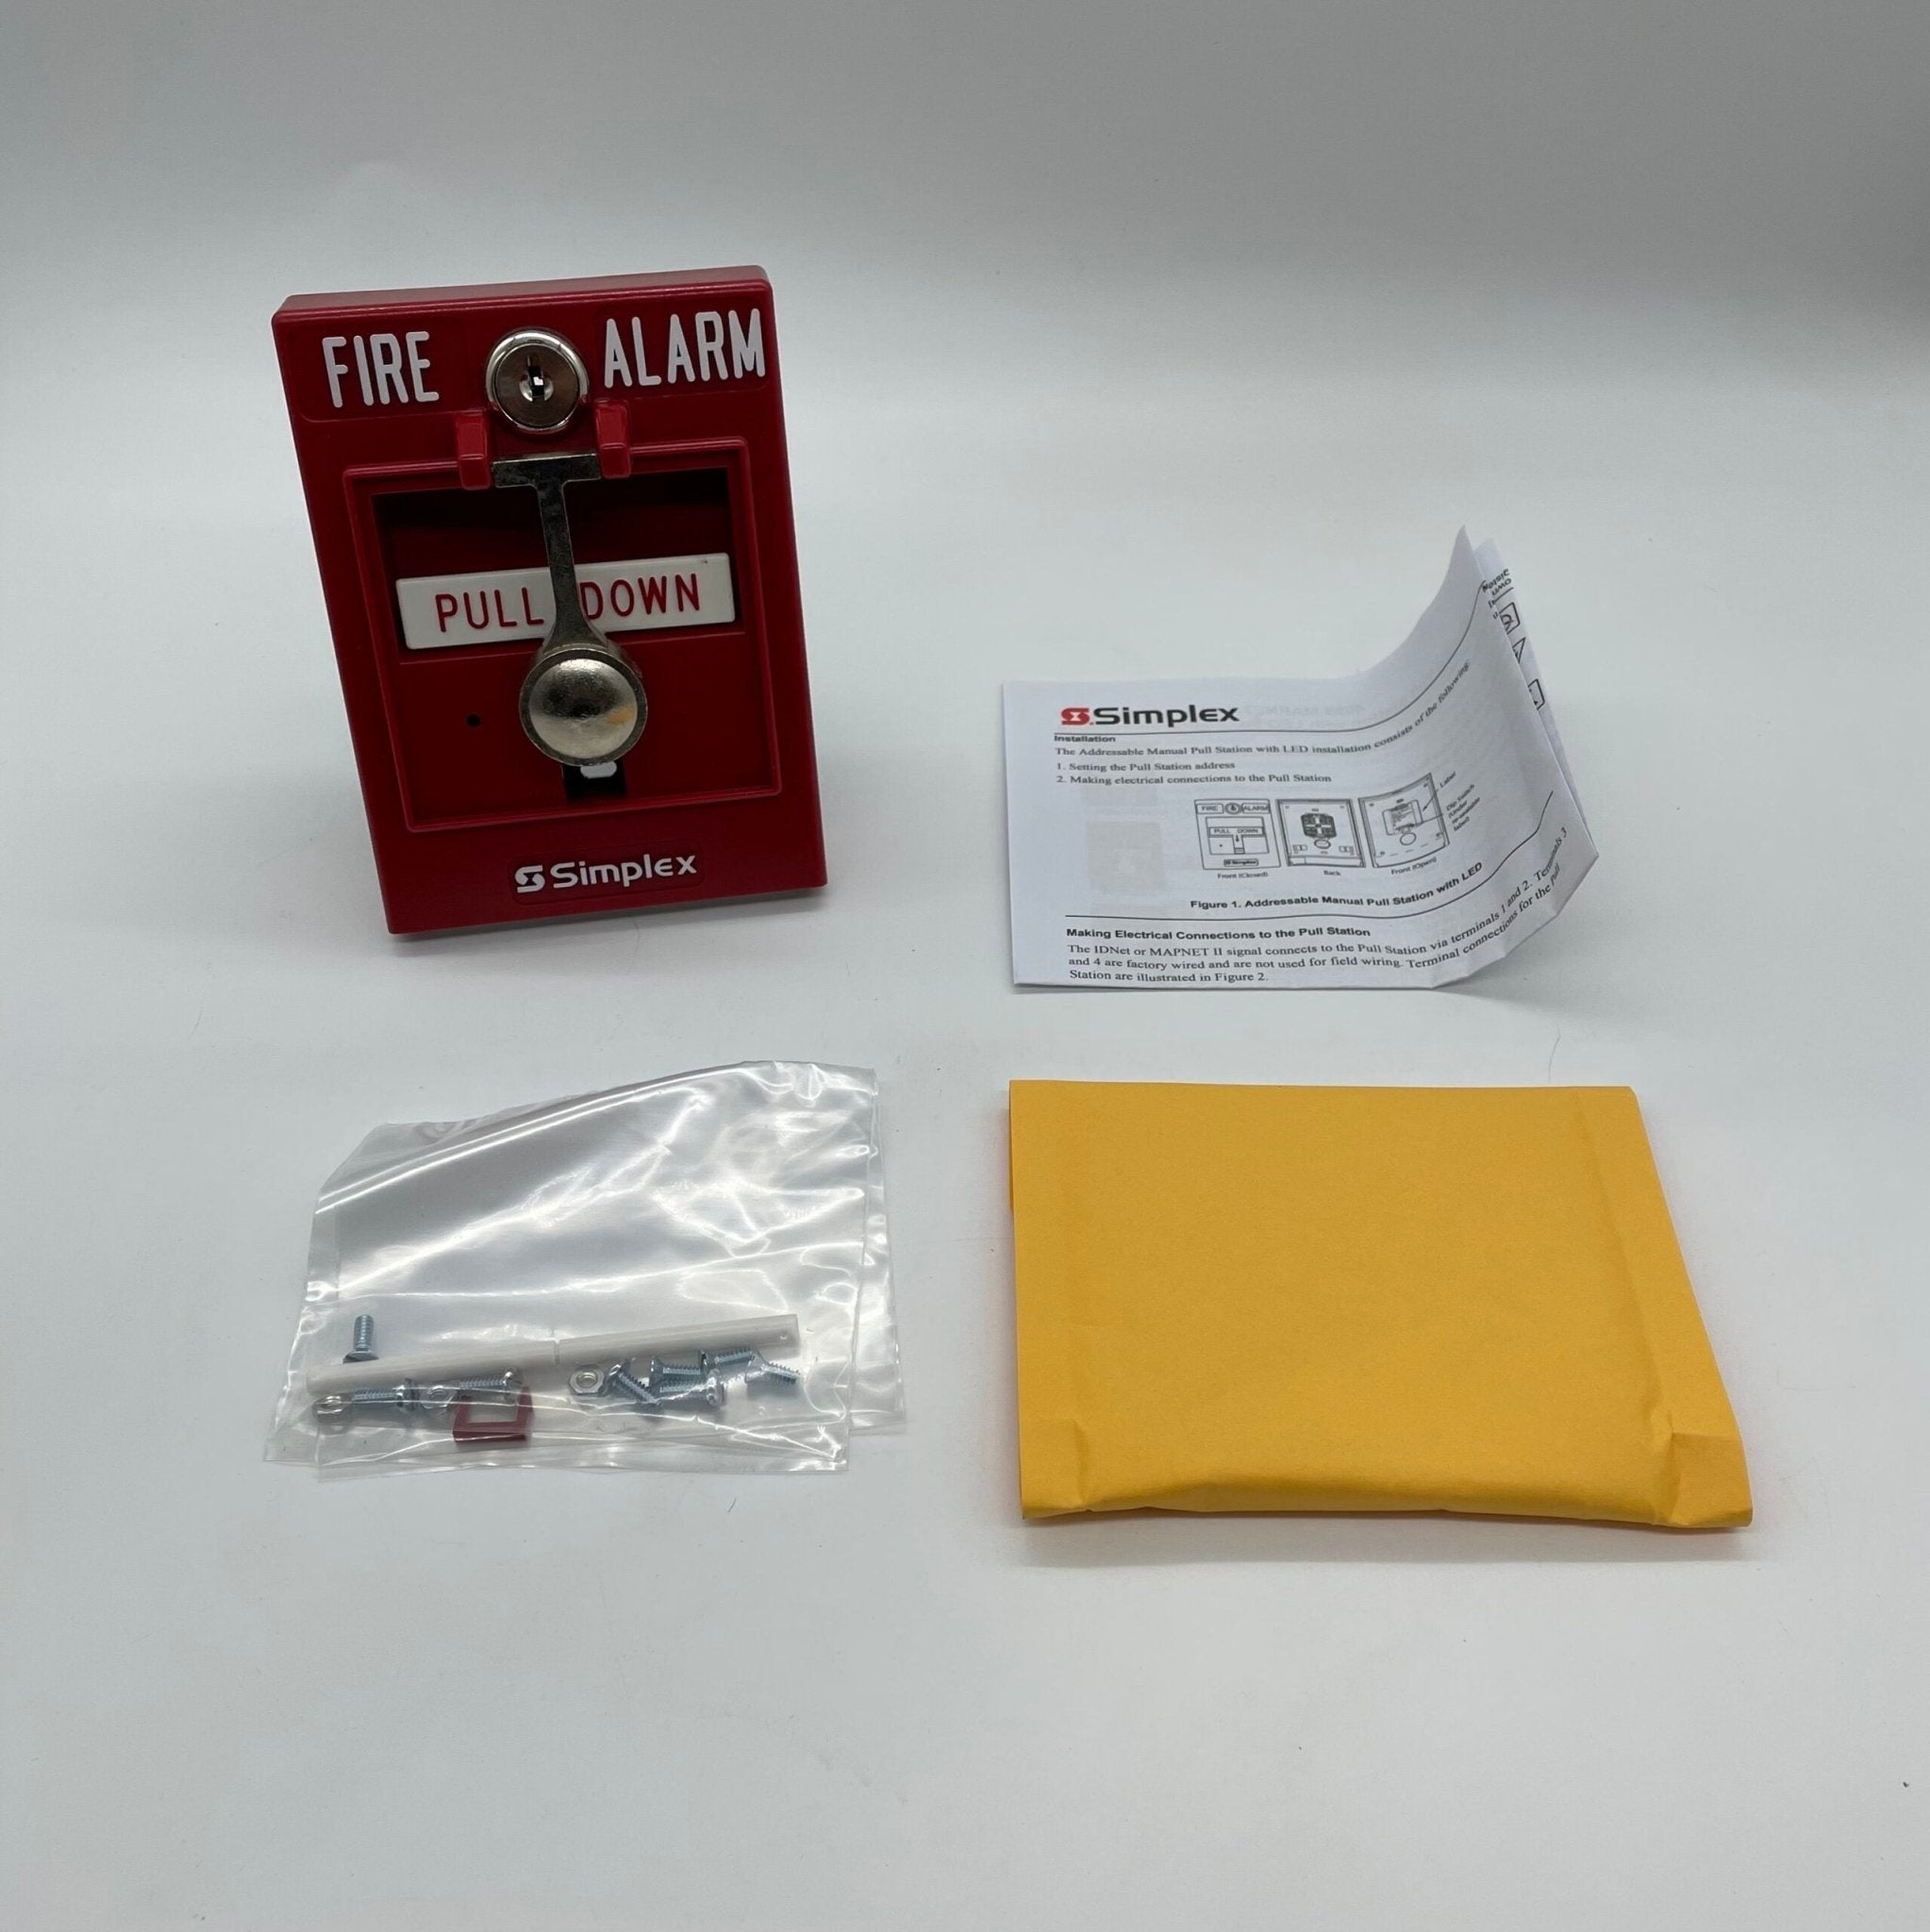 Simplex 4099-9005 Station Led Breakglass - The Fire Alarm Supplier